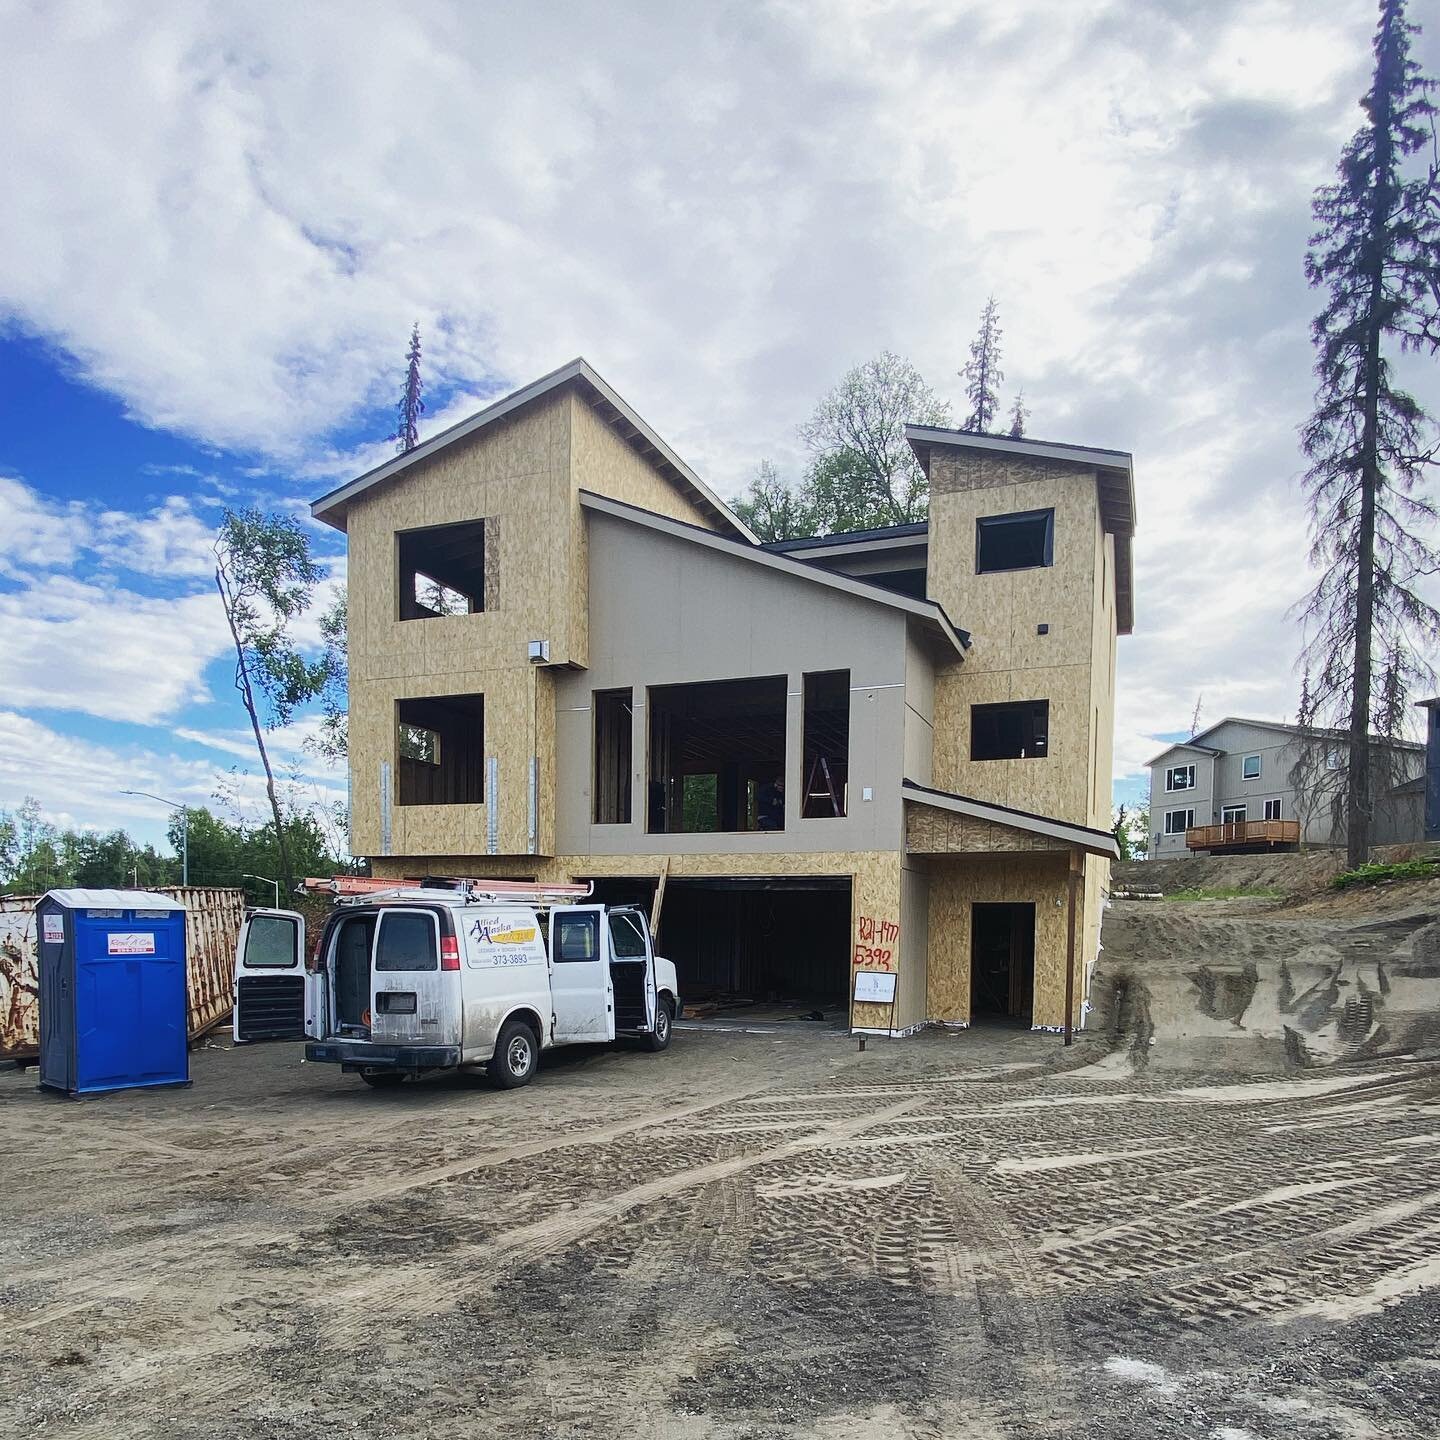 The Alpenglow💣 Although this one is sold, we will be offering the same plan in Potter highlands! Give us a call to design your dream! #BrickandBirchHomes #TheAlpenglow 
&bull;
&bull;
&bull;
&bull;
&bull;
&bull;

#newconstruction #dreamhome #dreamhom